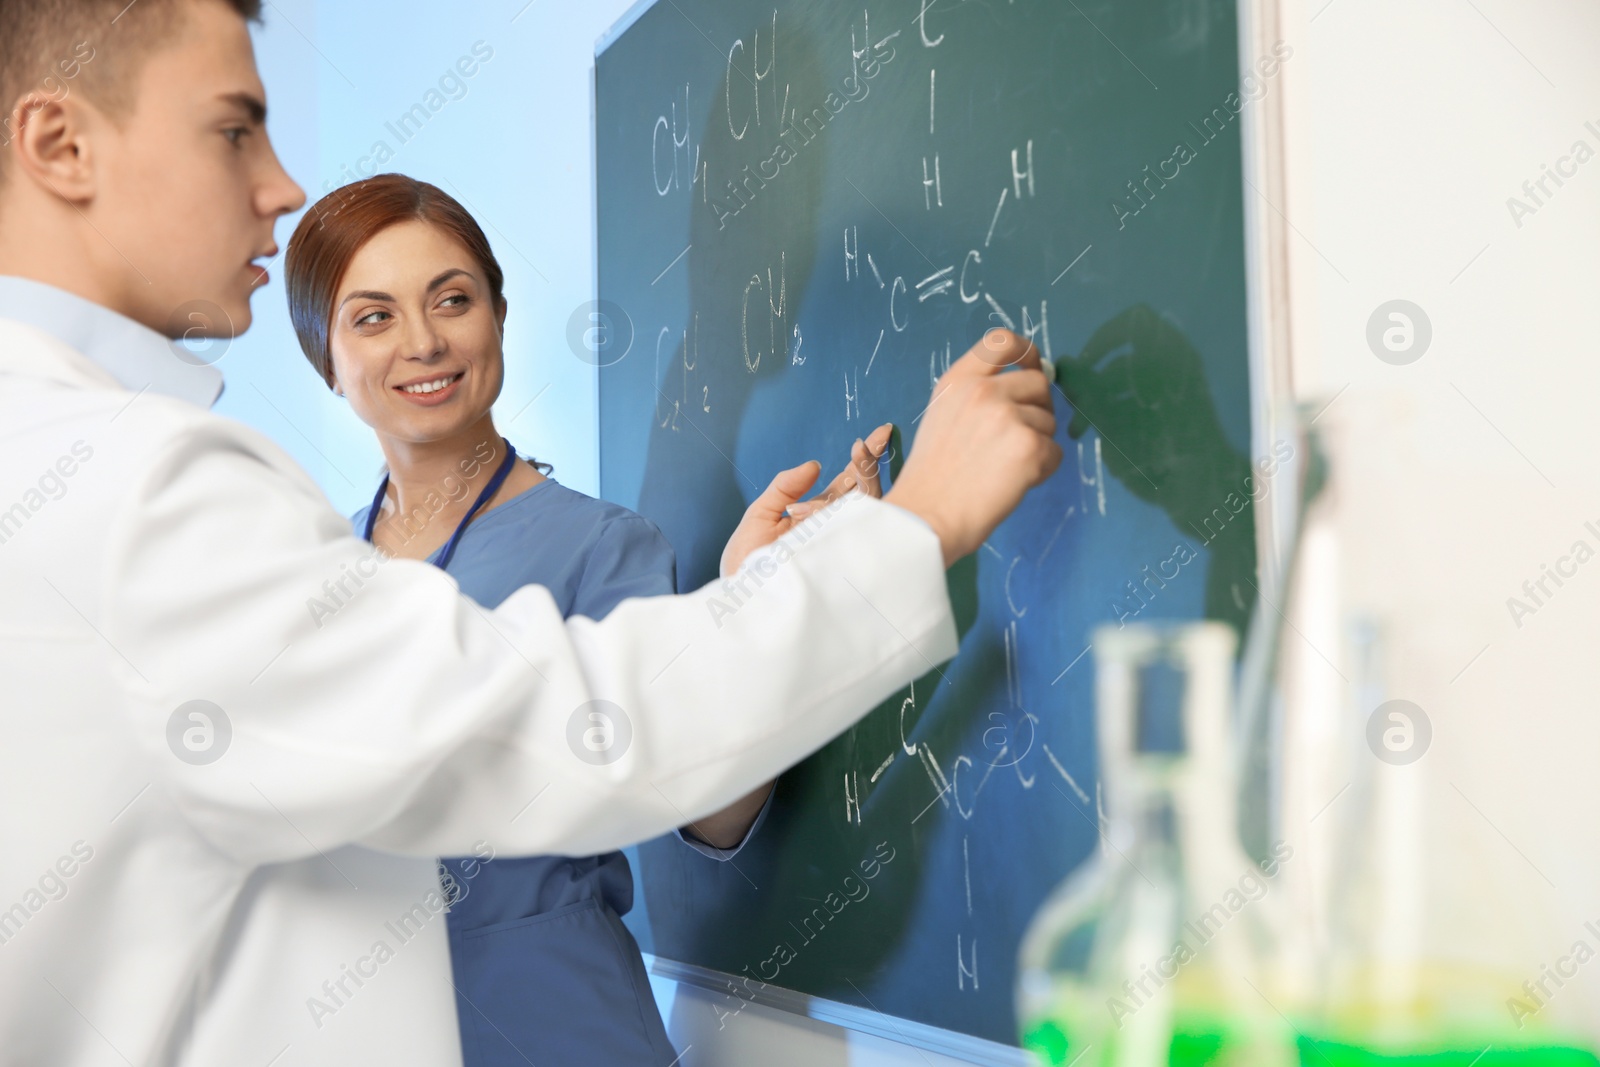 Photo of Scientists writing chemical formulas on chalkboard indoors